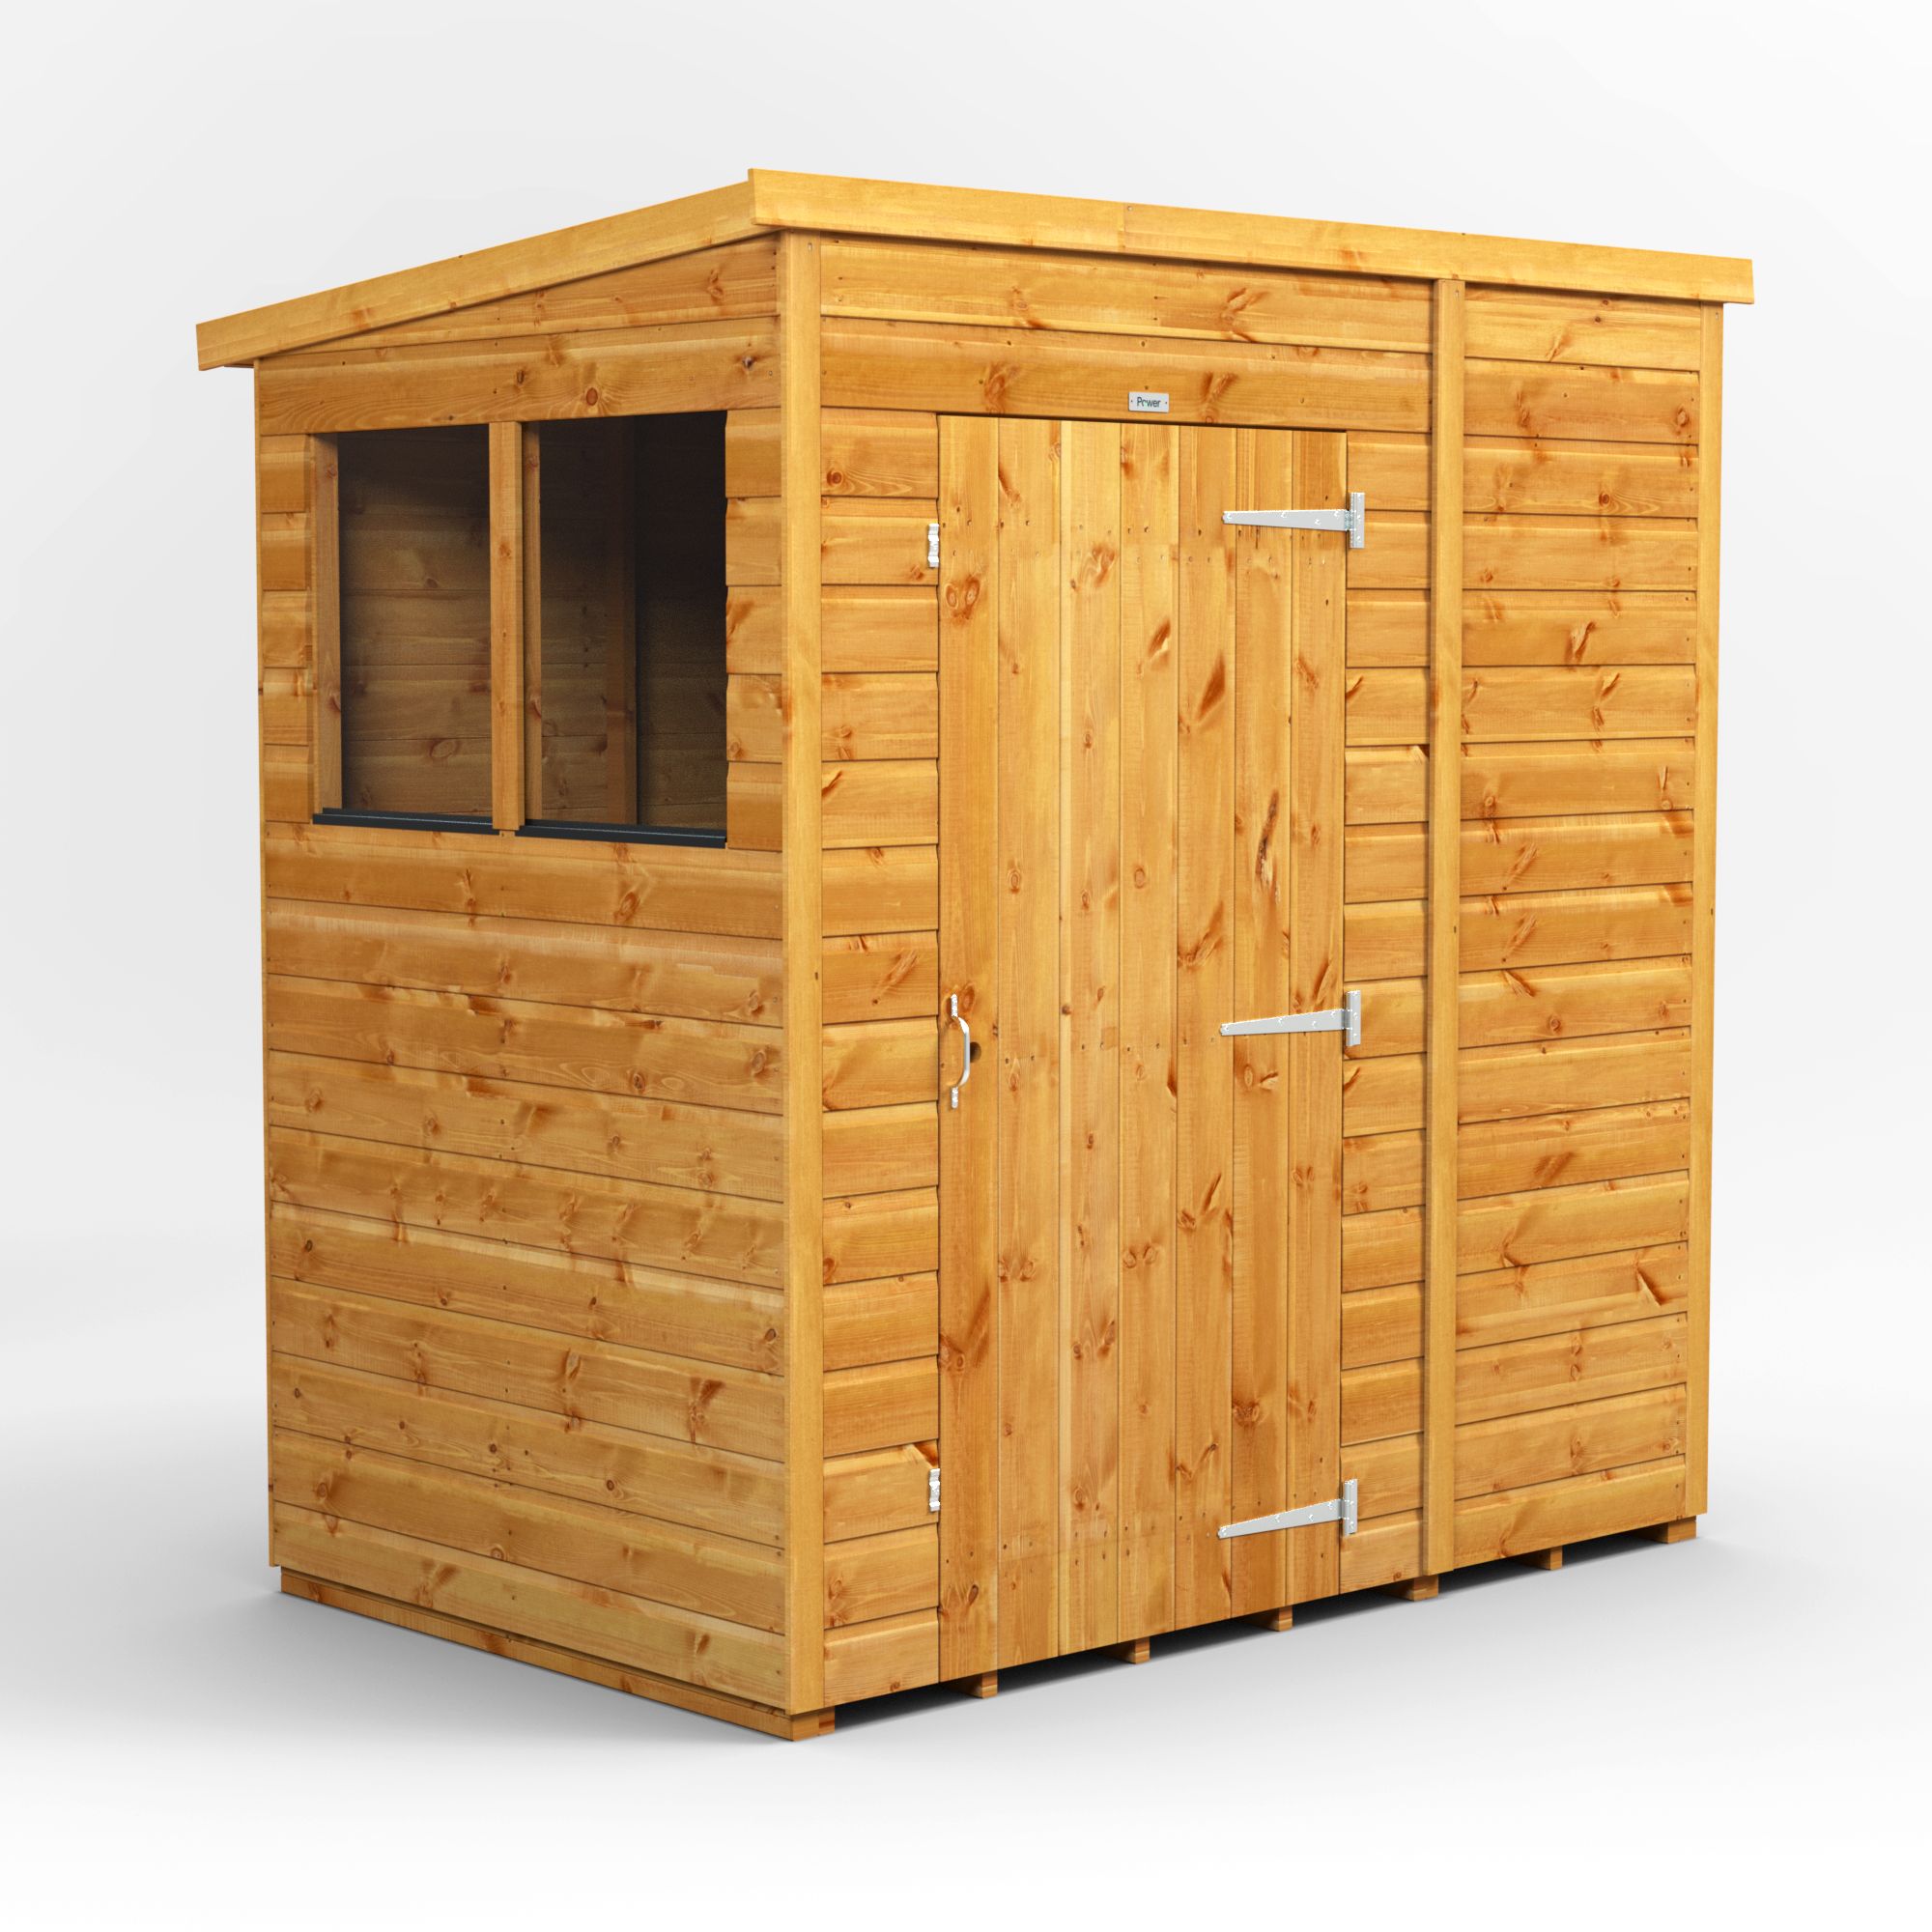 Power® PENT Shed 6x4 - A1 Sheds